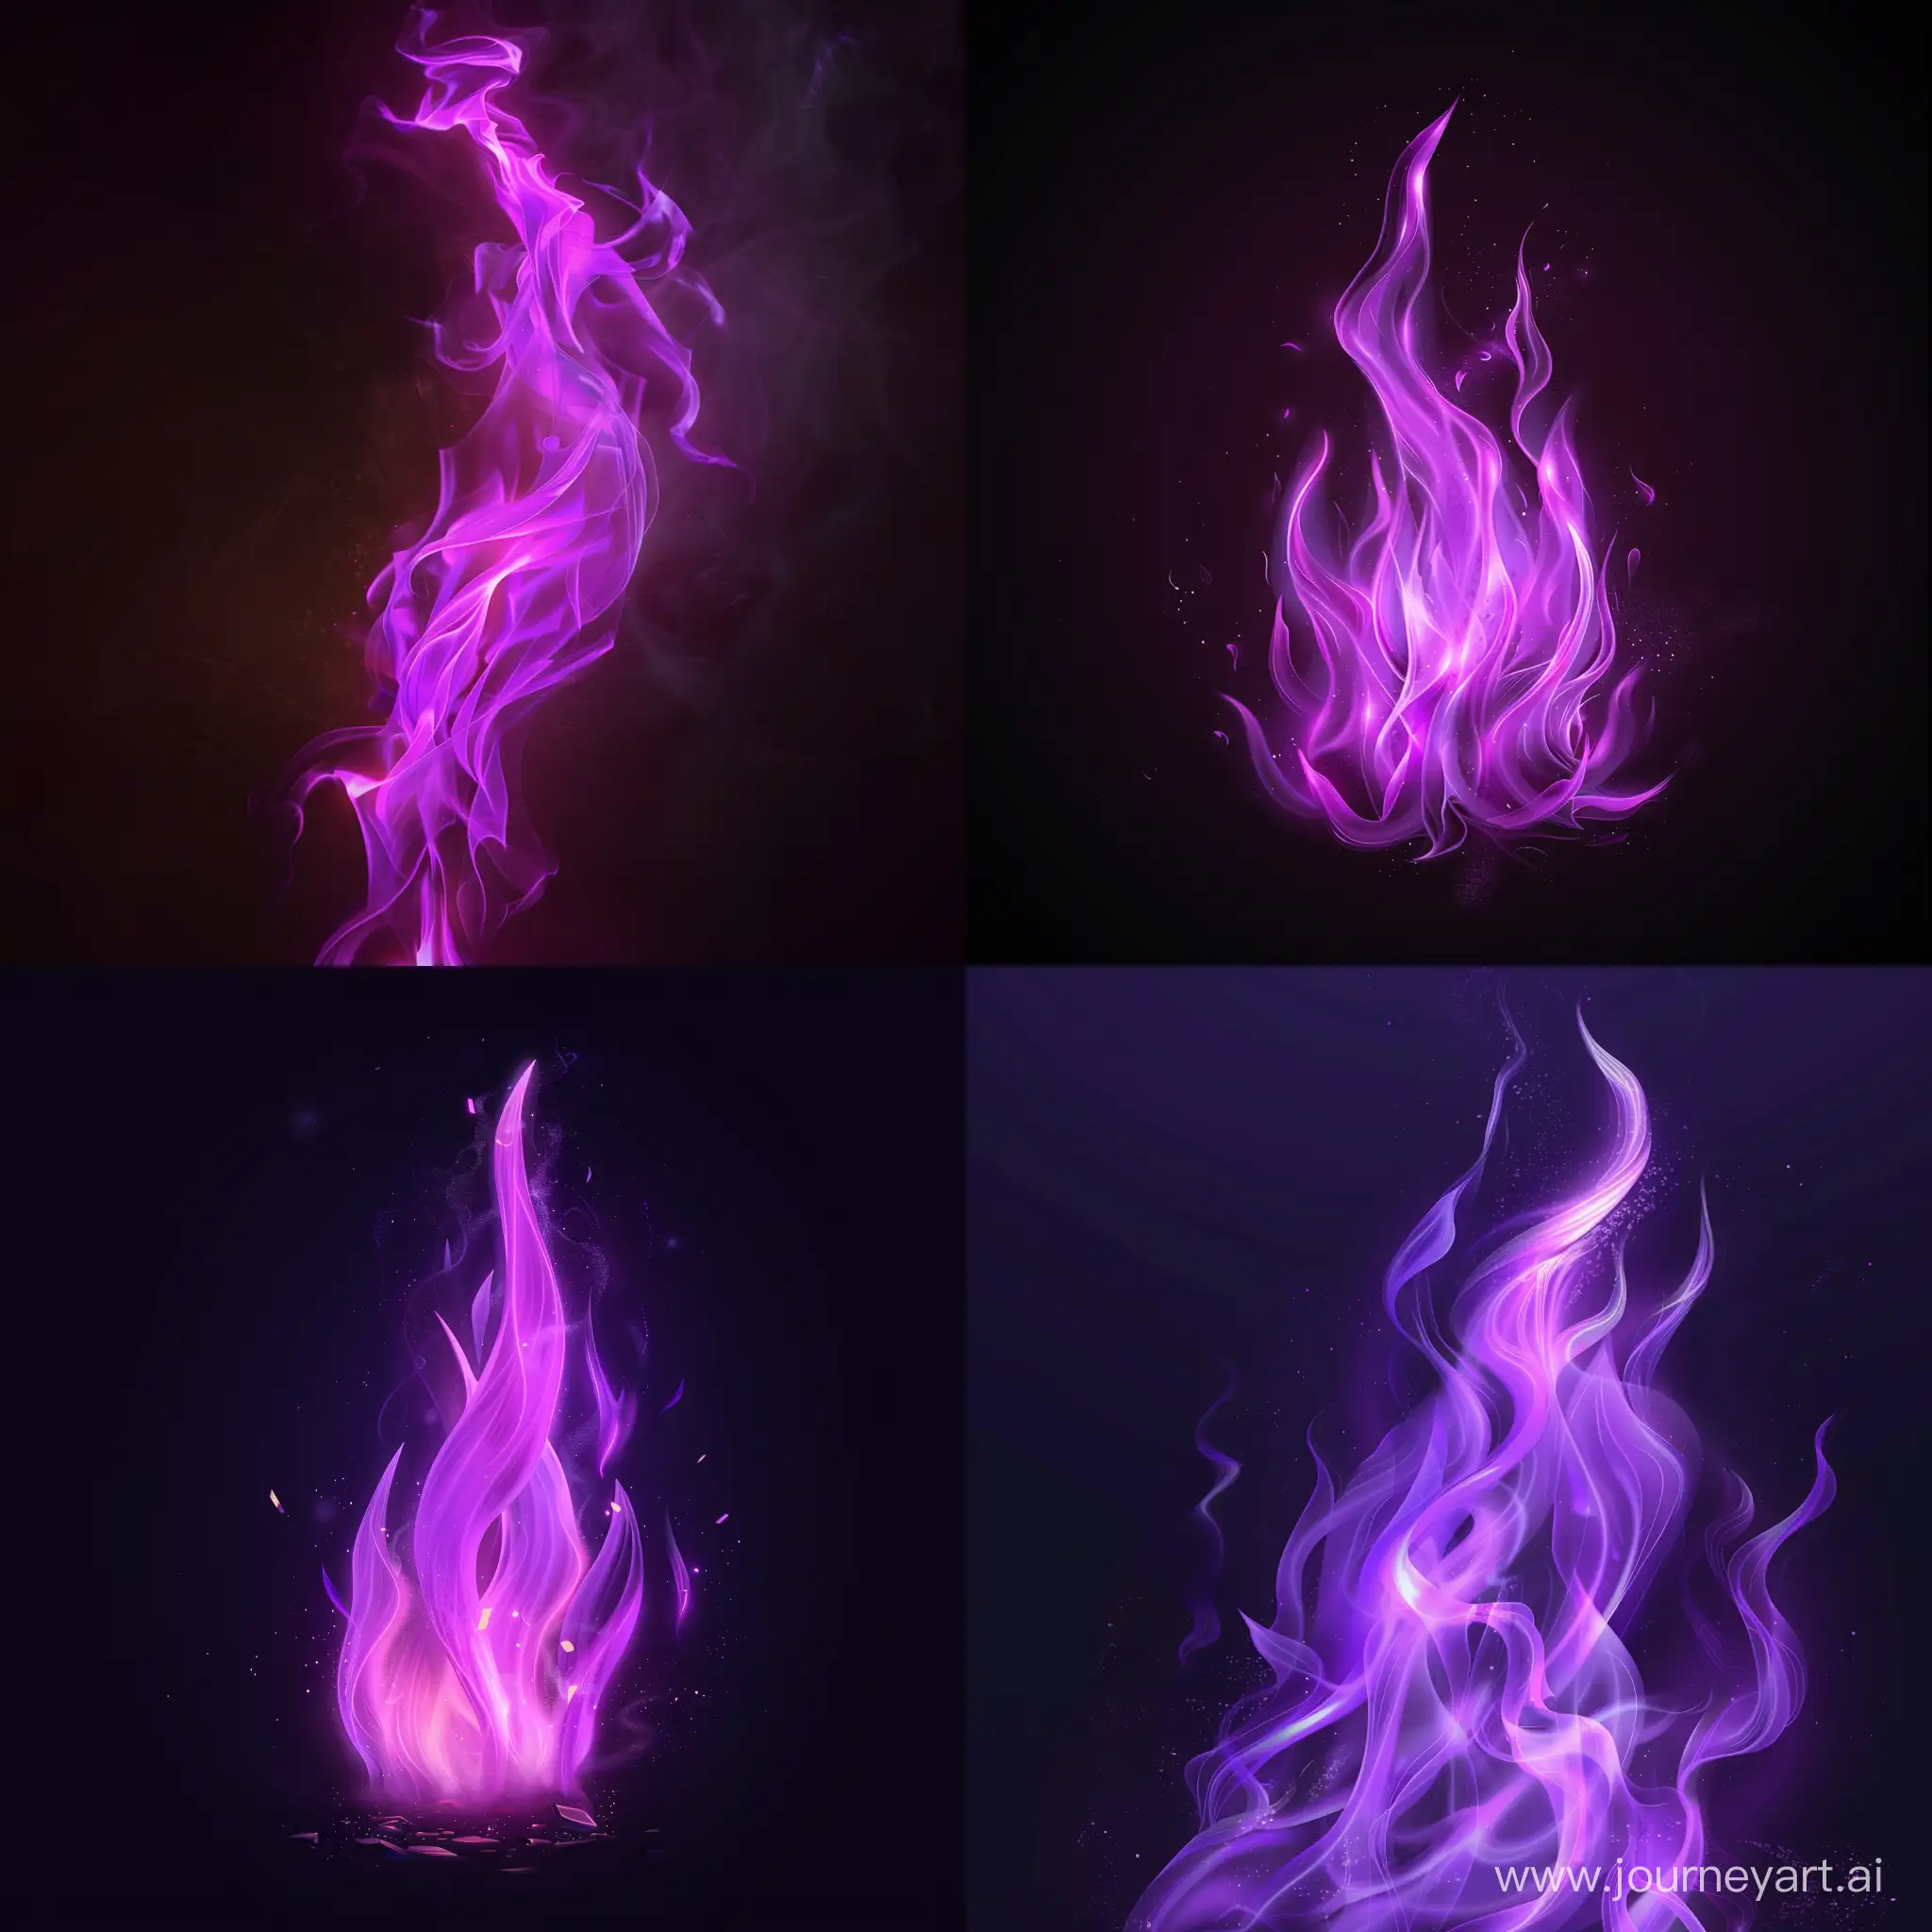 animation of the purple flame in 4 ticks